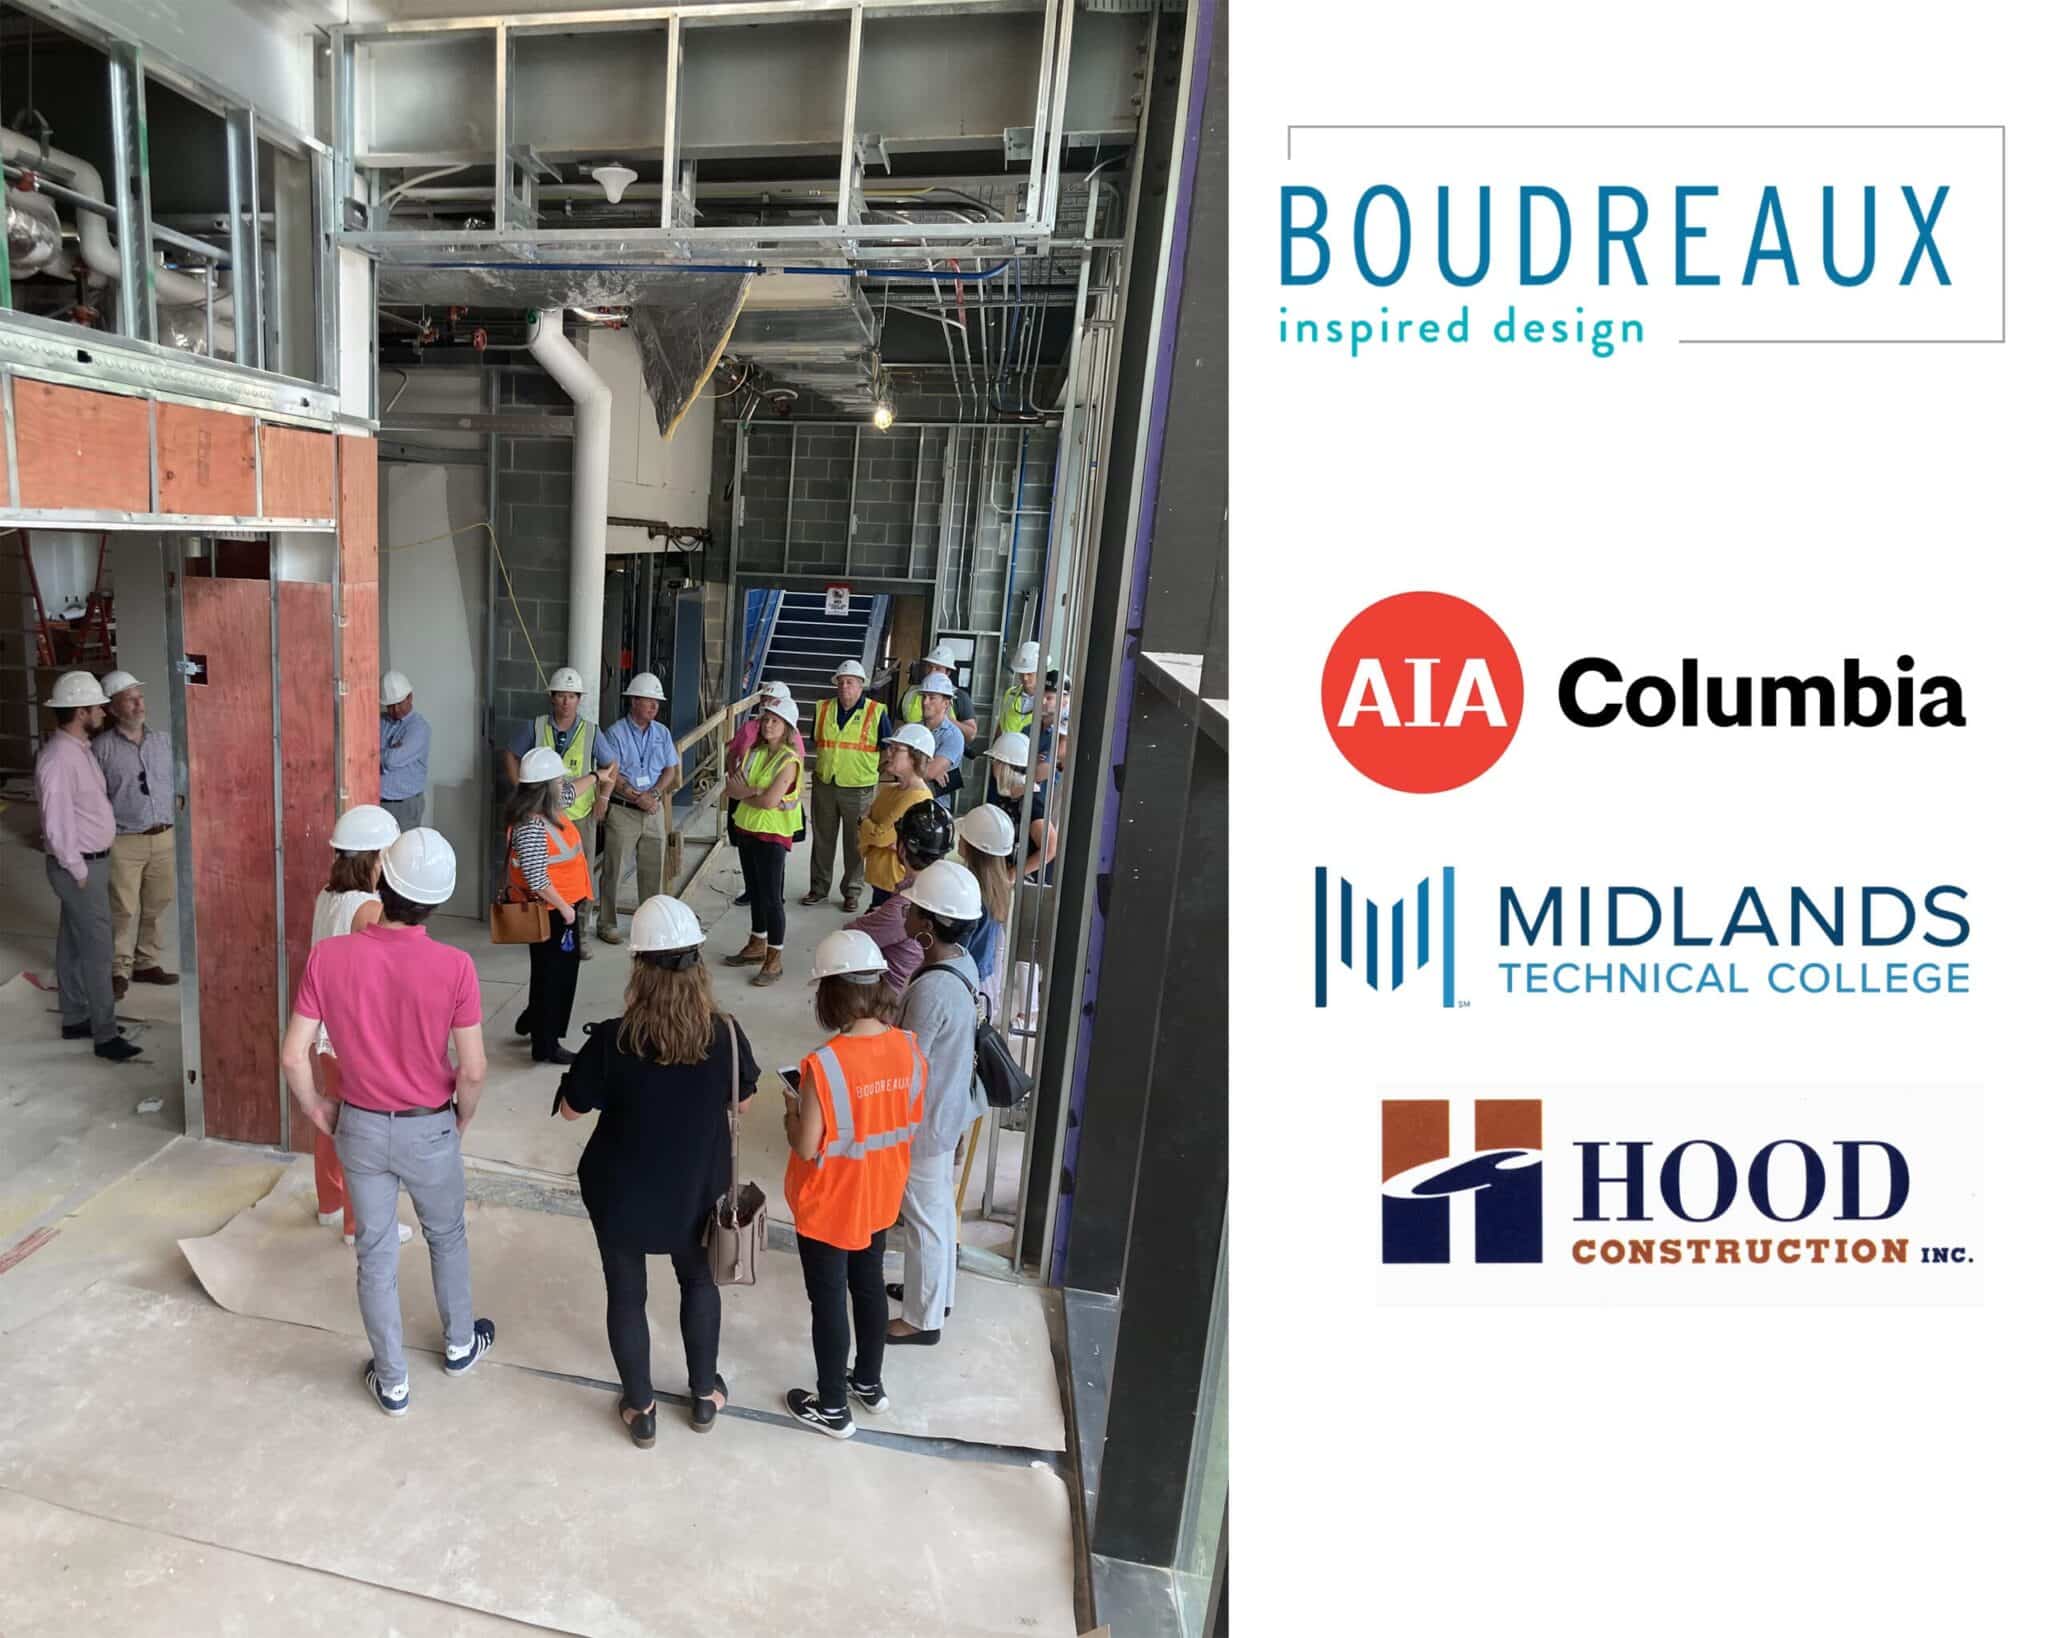 BOUDREAUX hosts an AIA Columbia Tour of MTC's new building - Business & Information Technology Building